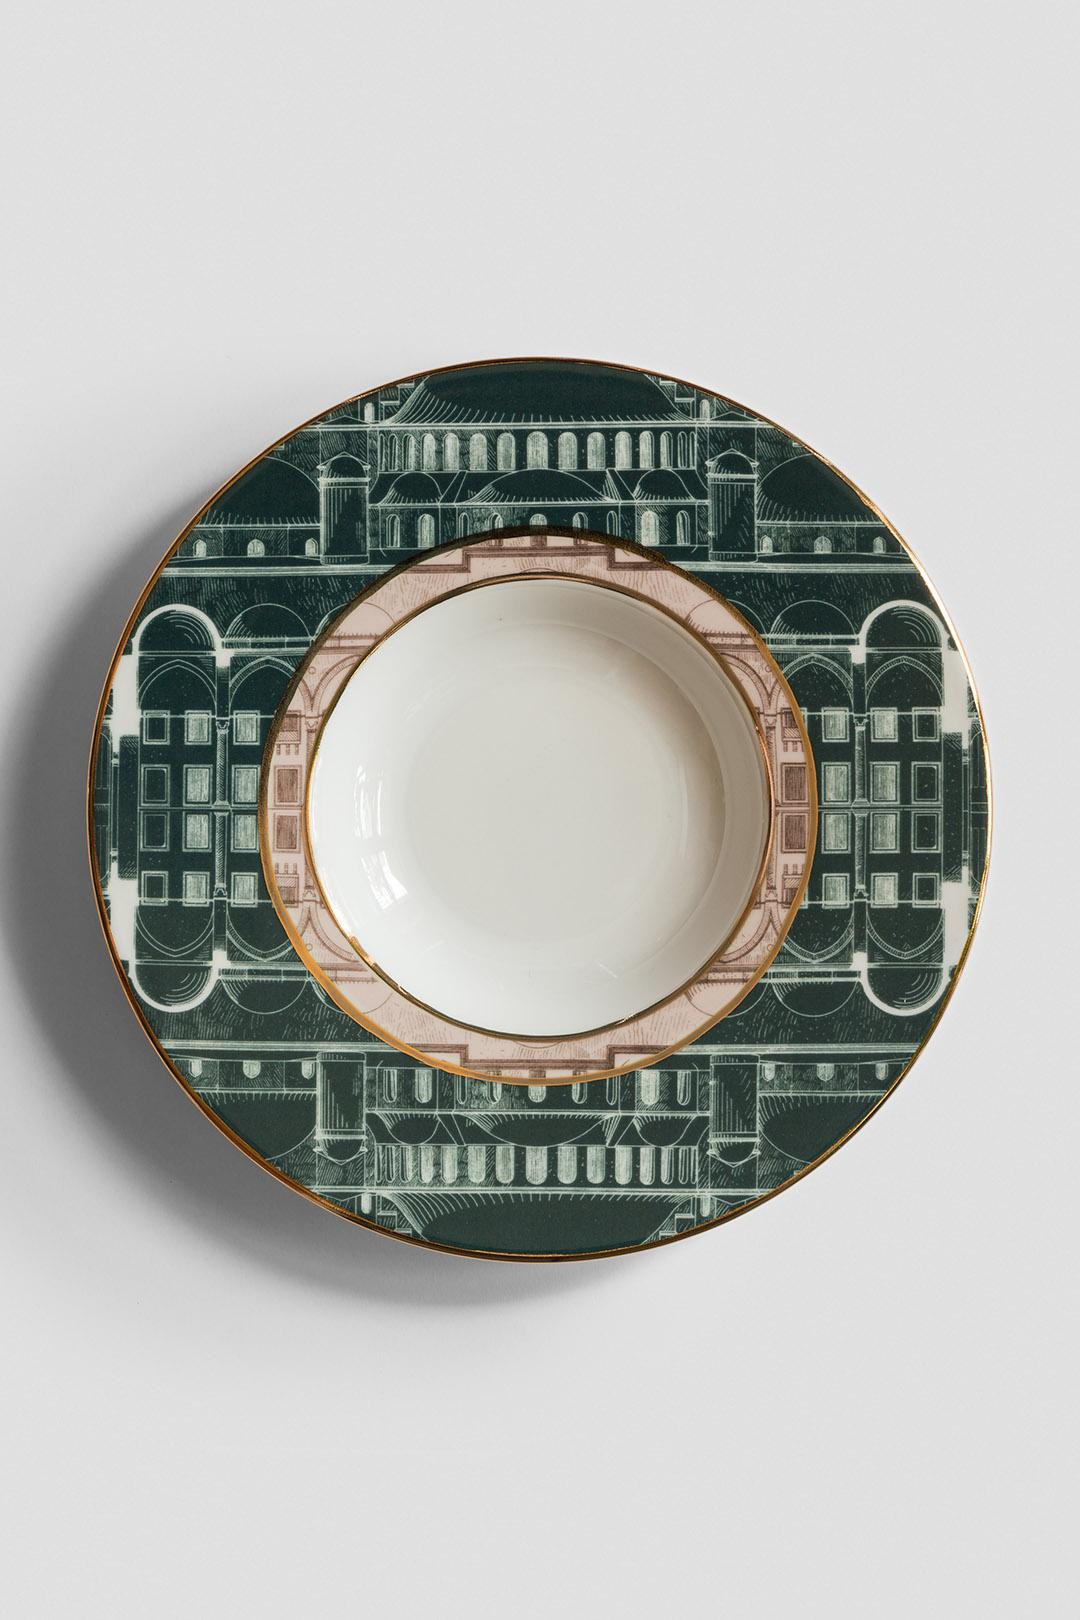 made in italy plates